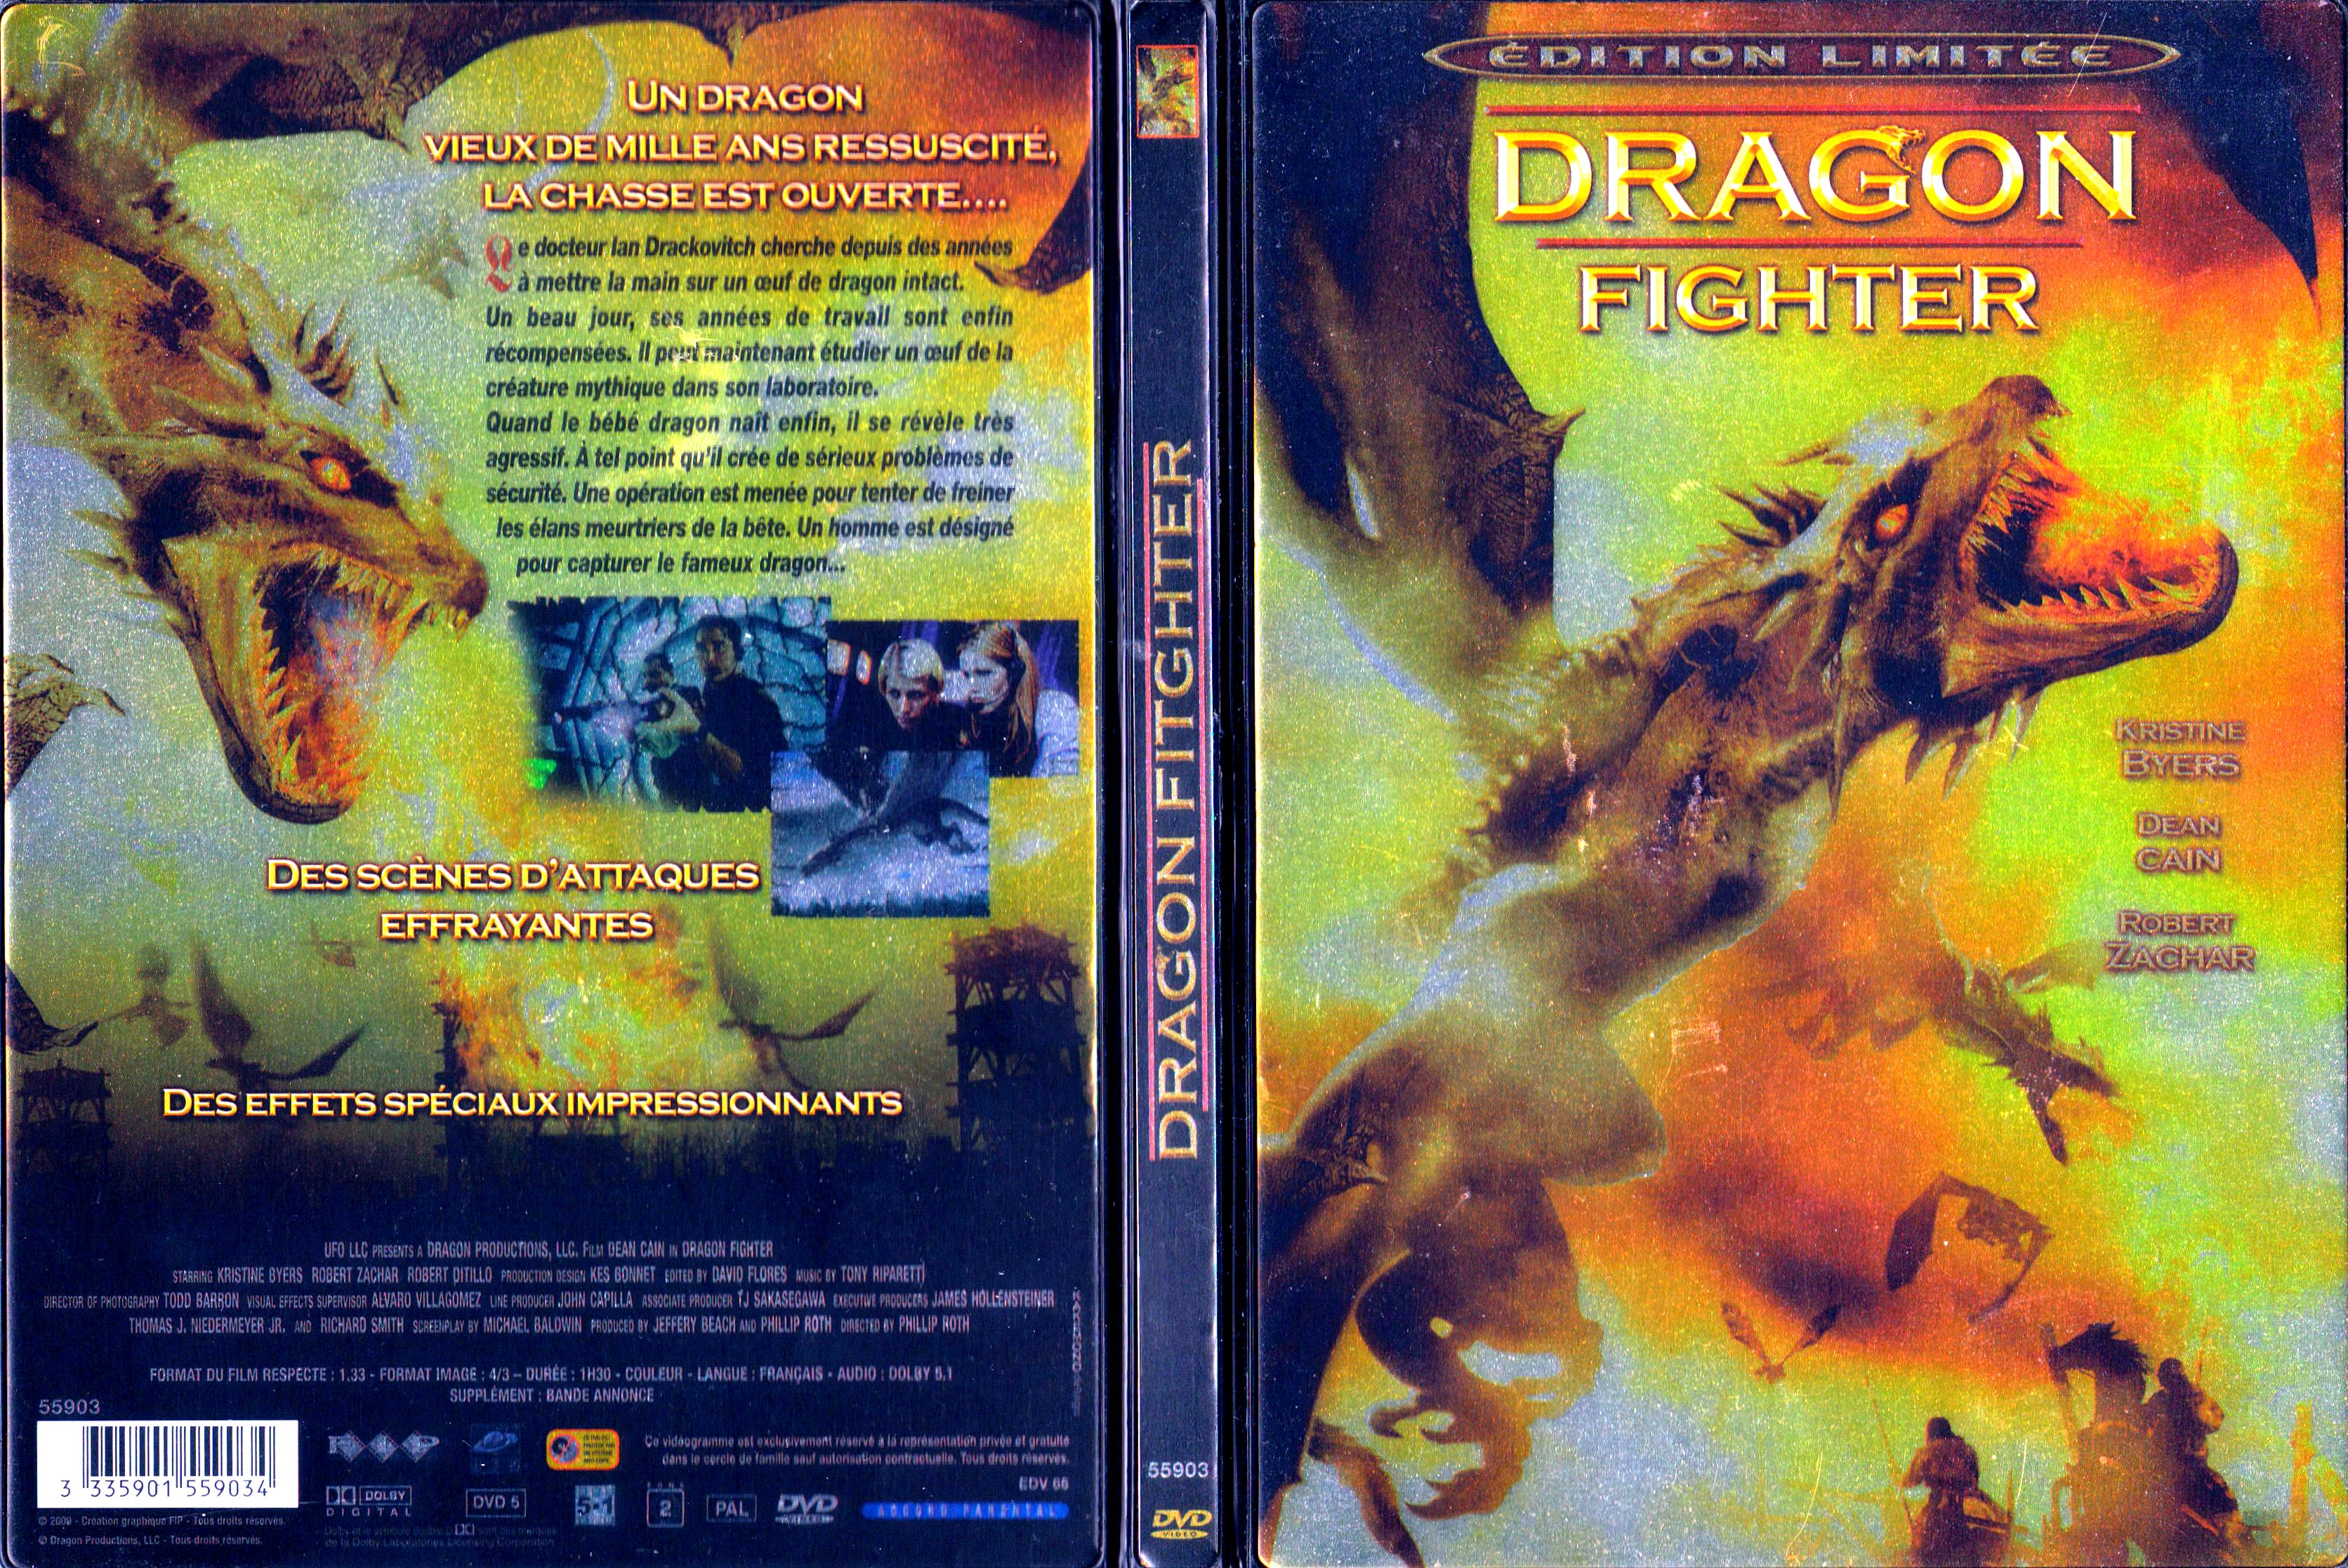 Jaquette DVD Dragon fighter